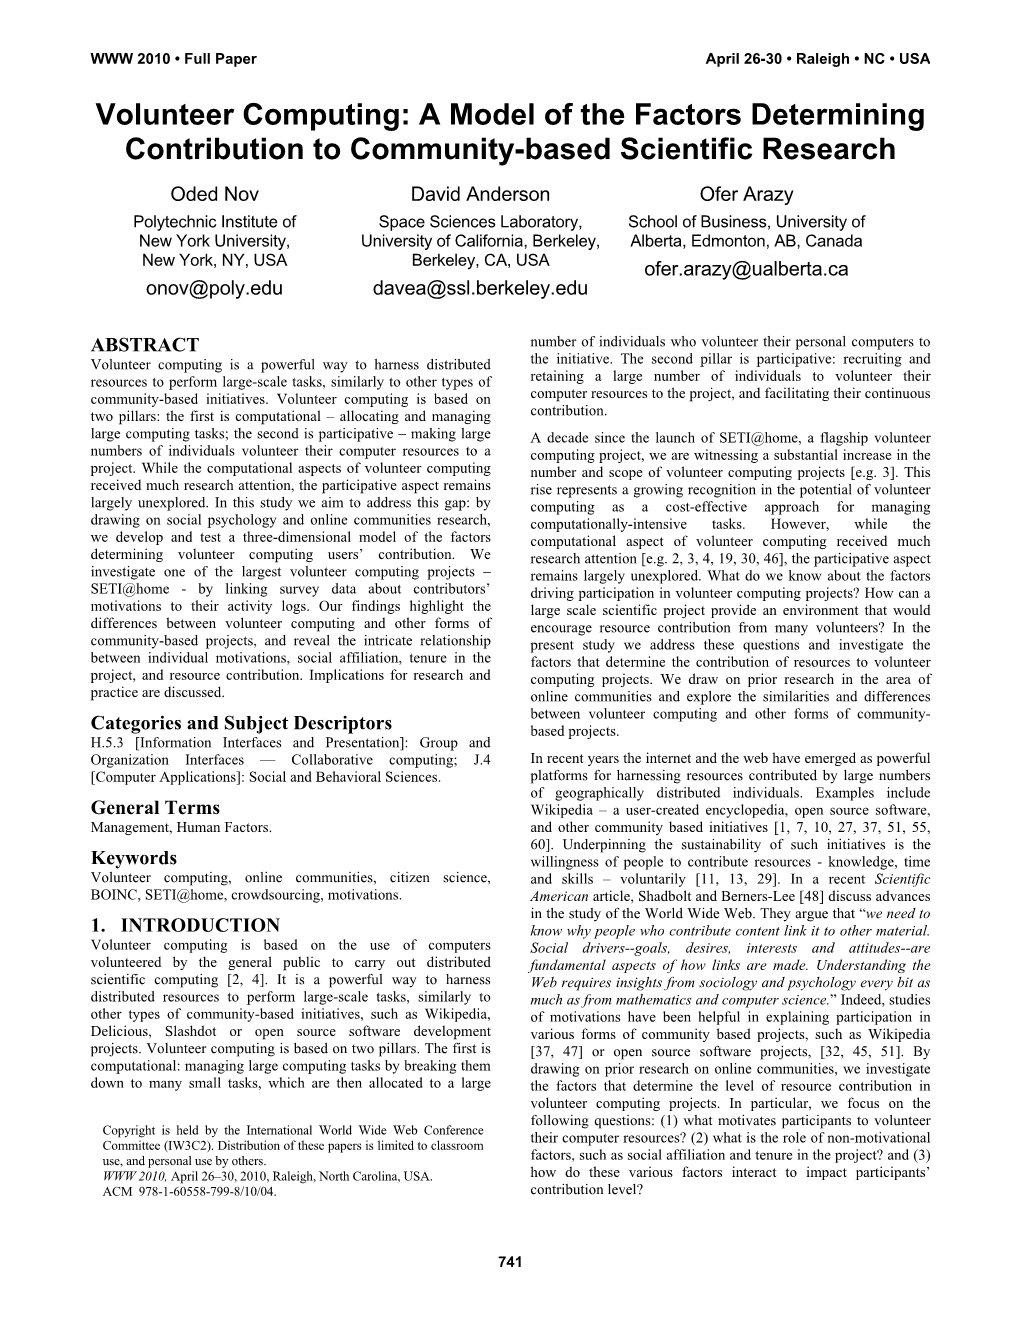 Volunteer Computing: a Model of the Factors Determining Contribution To